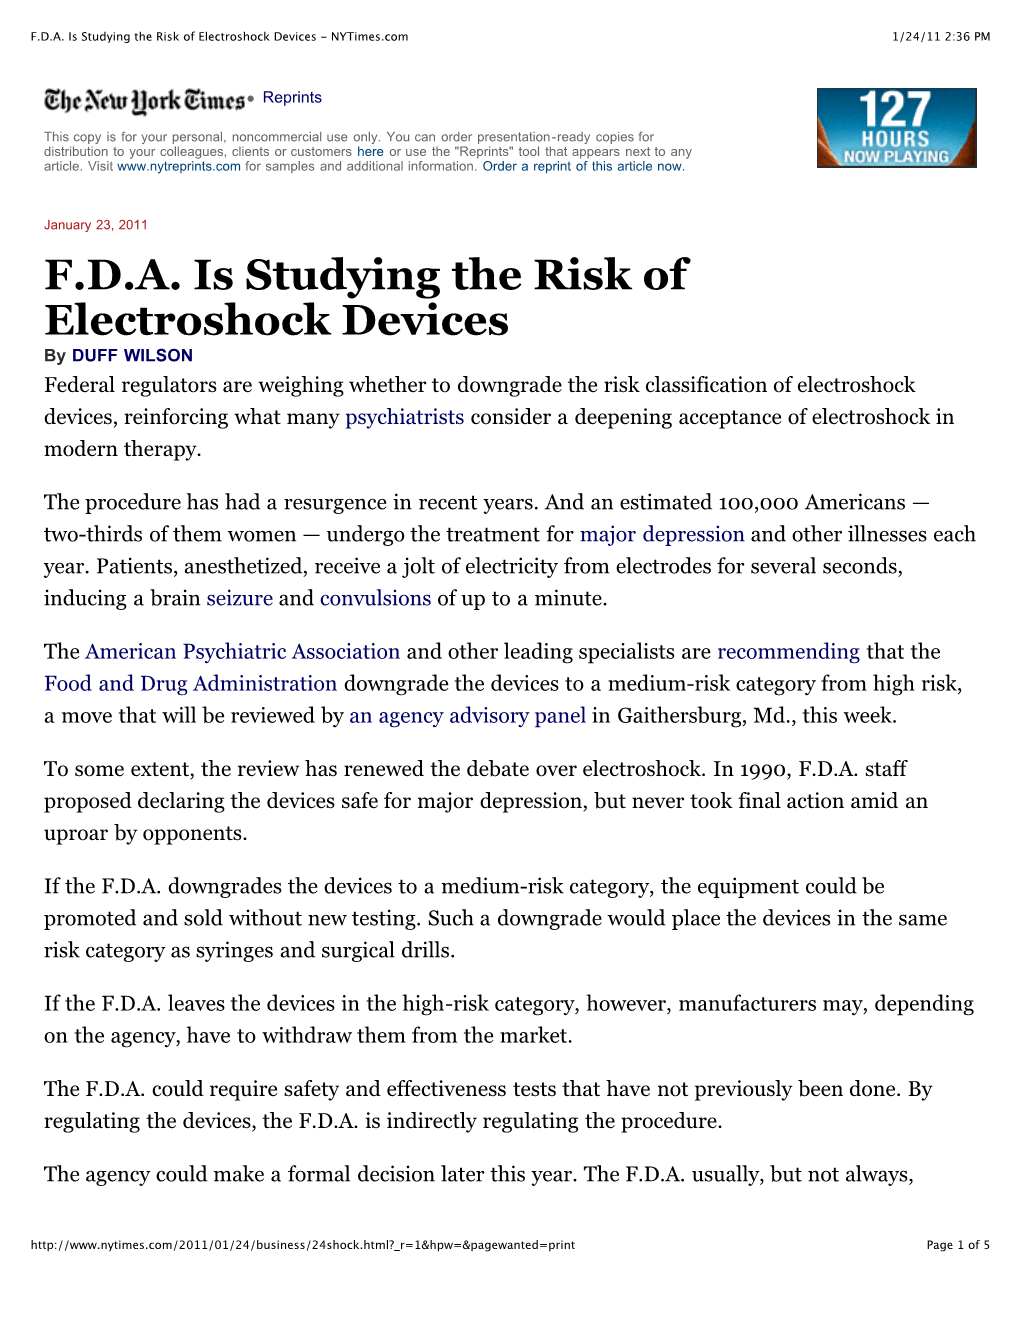 FDA Is Studying the Risk of Electroshock Devices